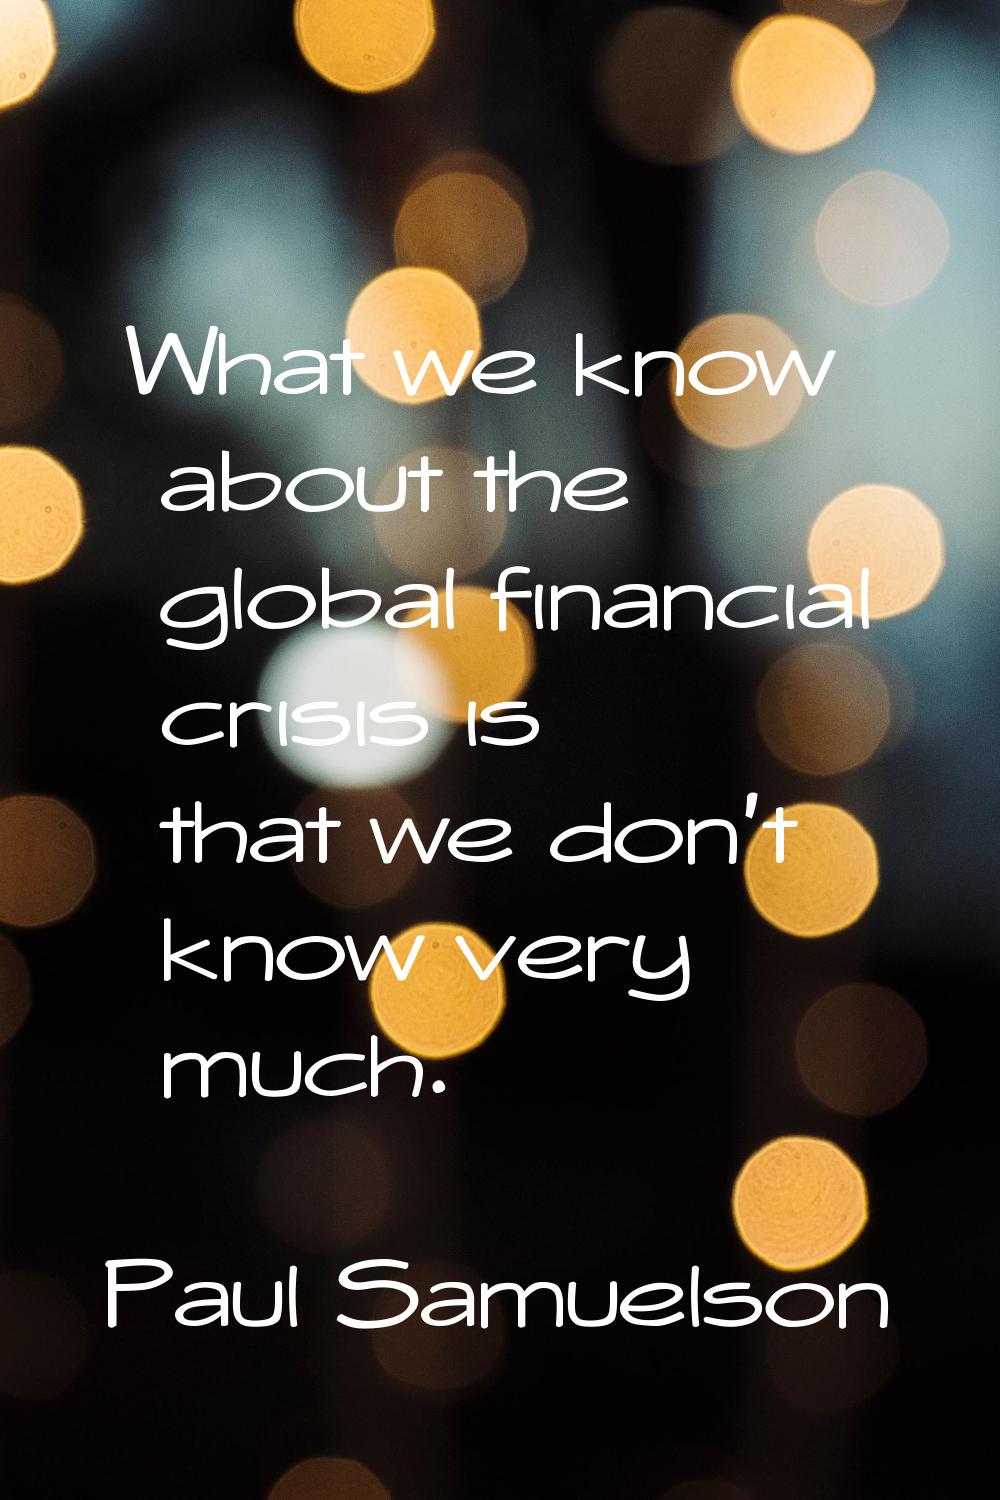 What we know about the global financial crisis is that we don't know very much.